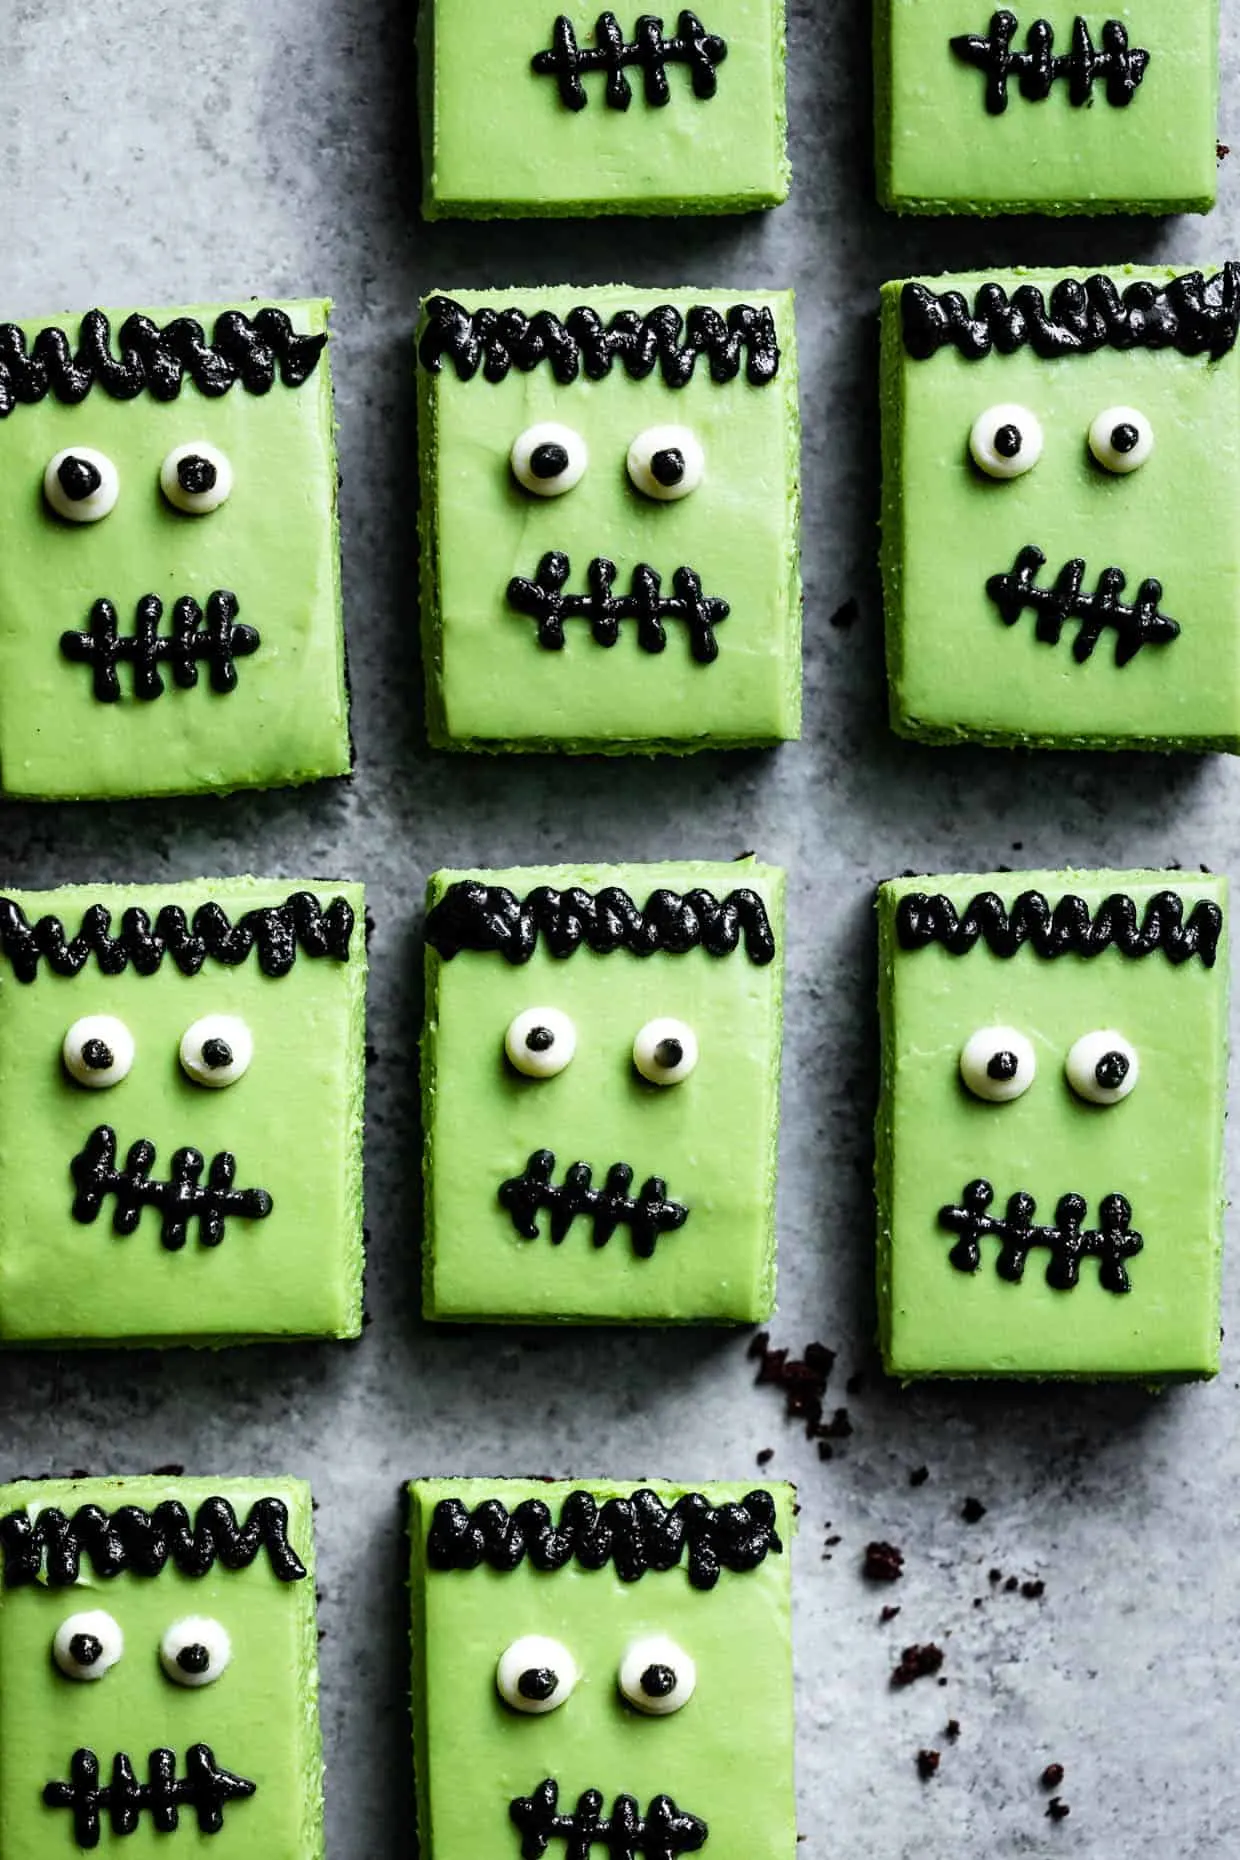 Frankenstein Cheesecake Bars lined up on a gray surface - they're decorated with black sesame paste and candy eyes